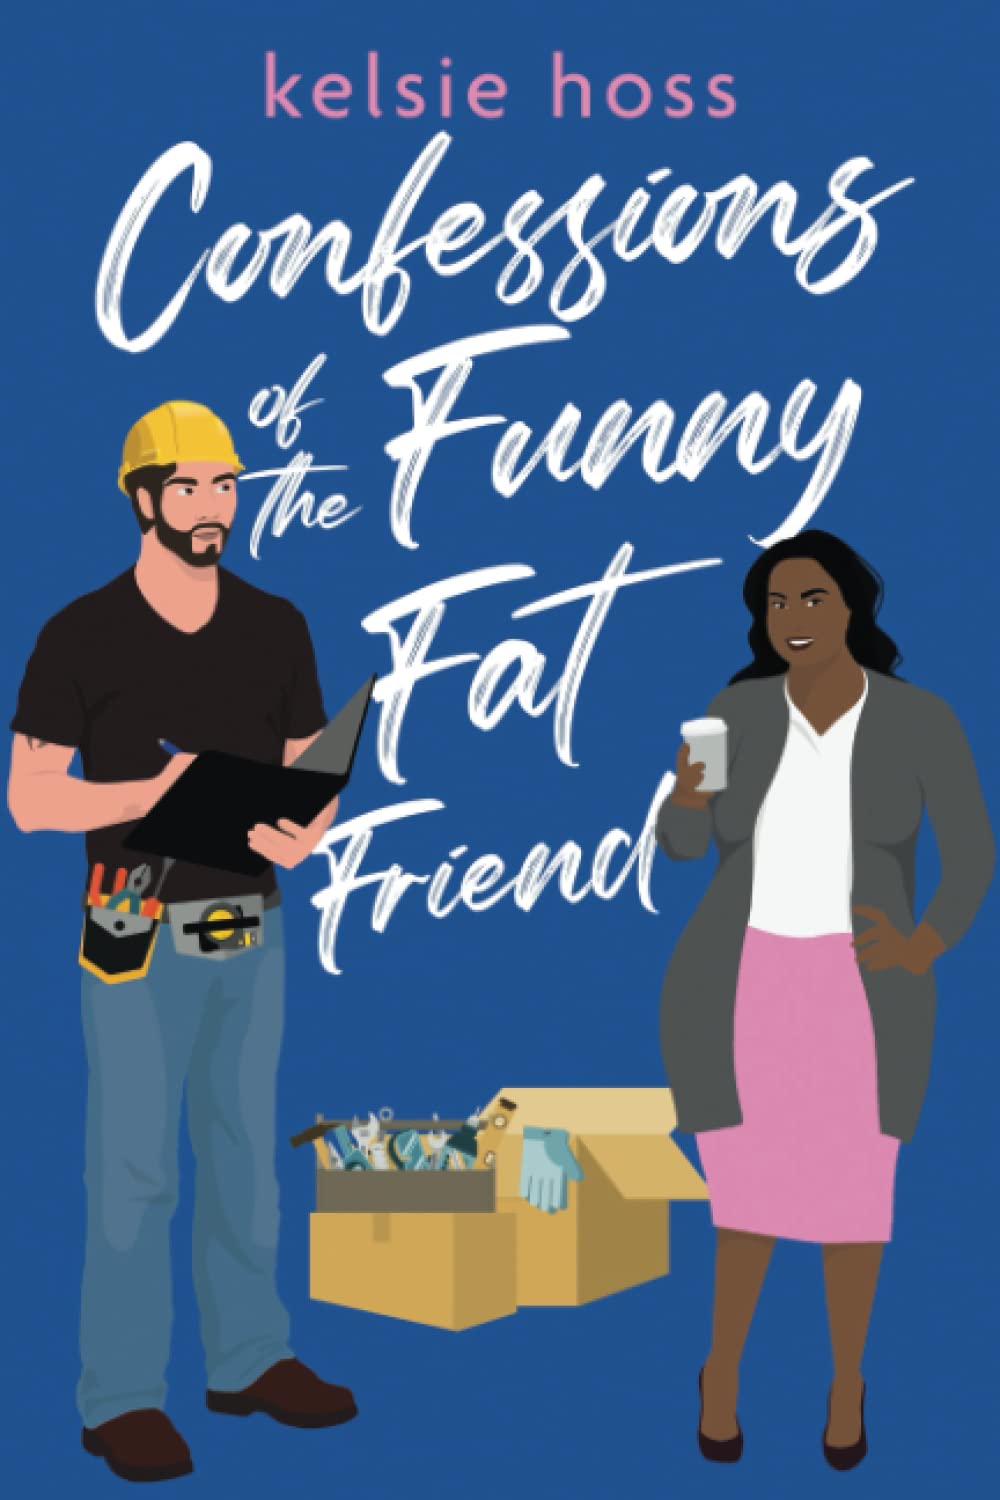 Confessions of the Funny Fat Friend